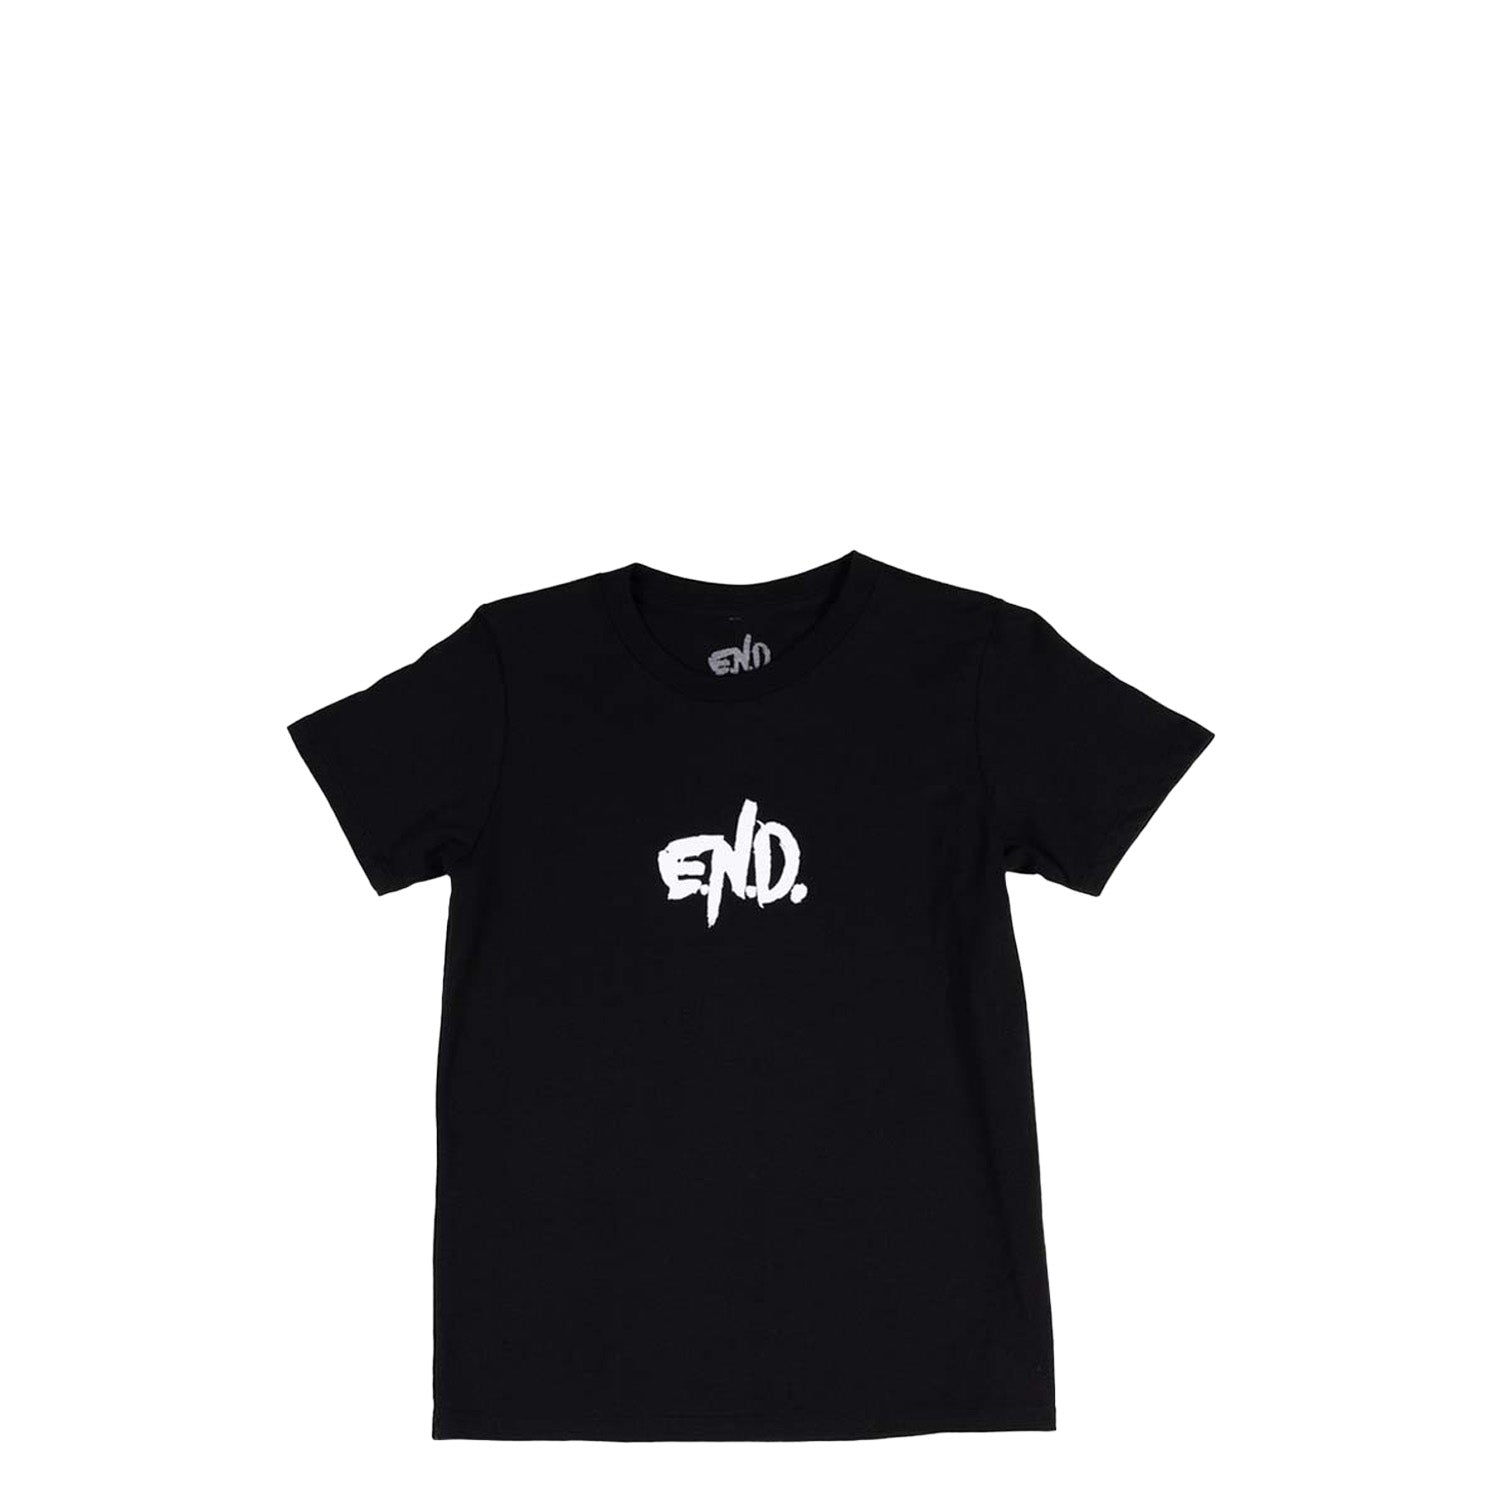 Emo’s Not Dead, Band Merch, Youth END Tee